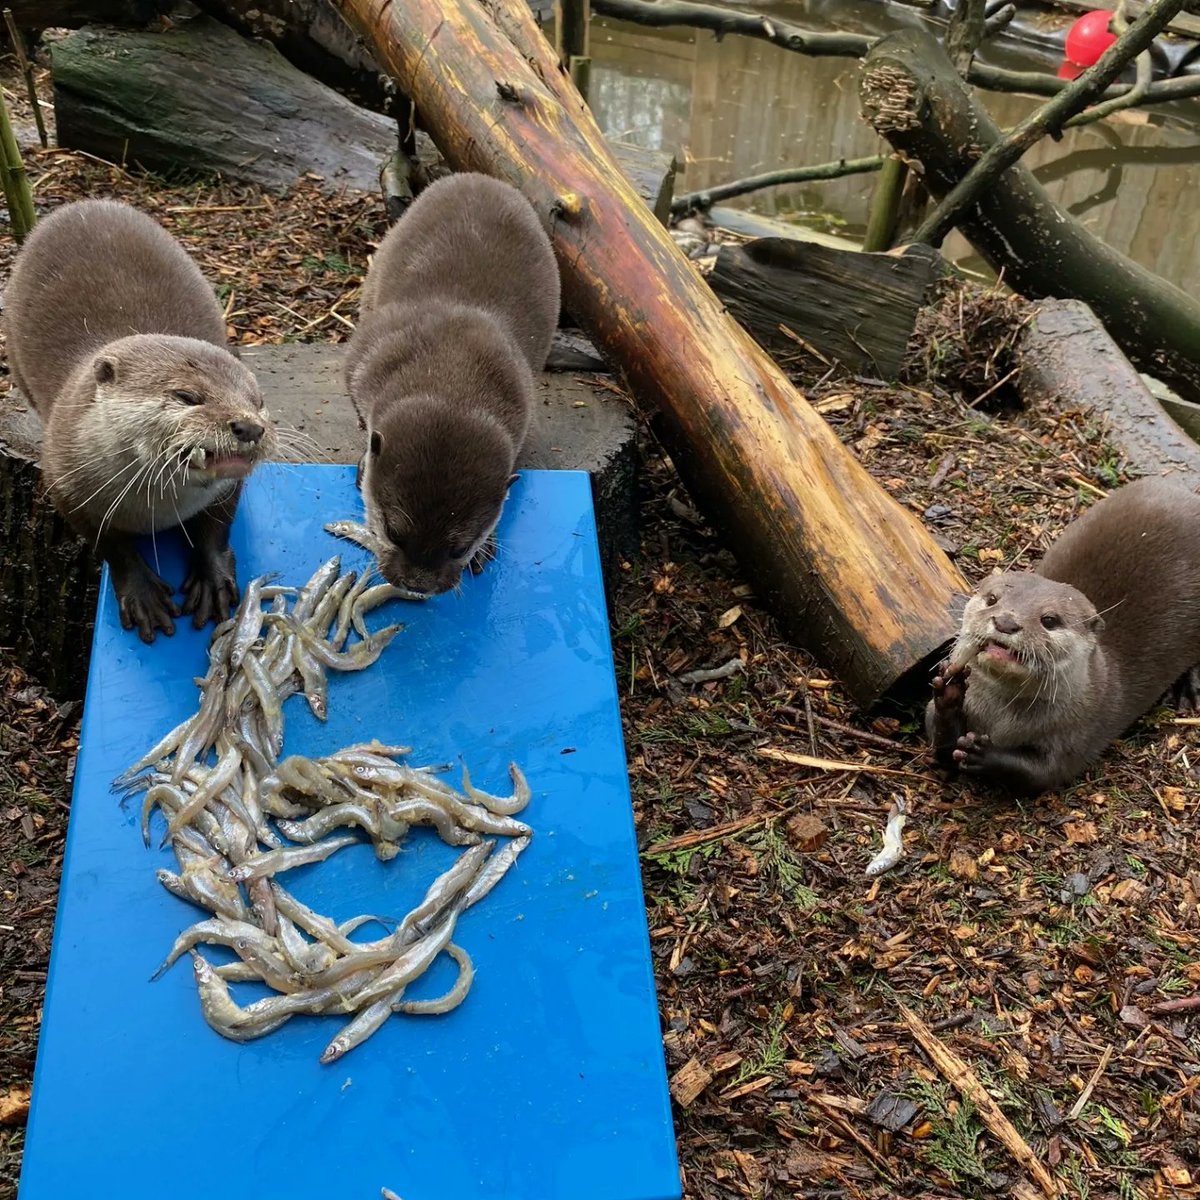 🦦It was our otters 6th birthday today, so they had a bit of a party! 🐟🎁

📷 Keeper Matt

#otters #birthday #zoolife #notapet #visitkent #ottersoftwitter